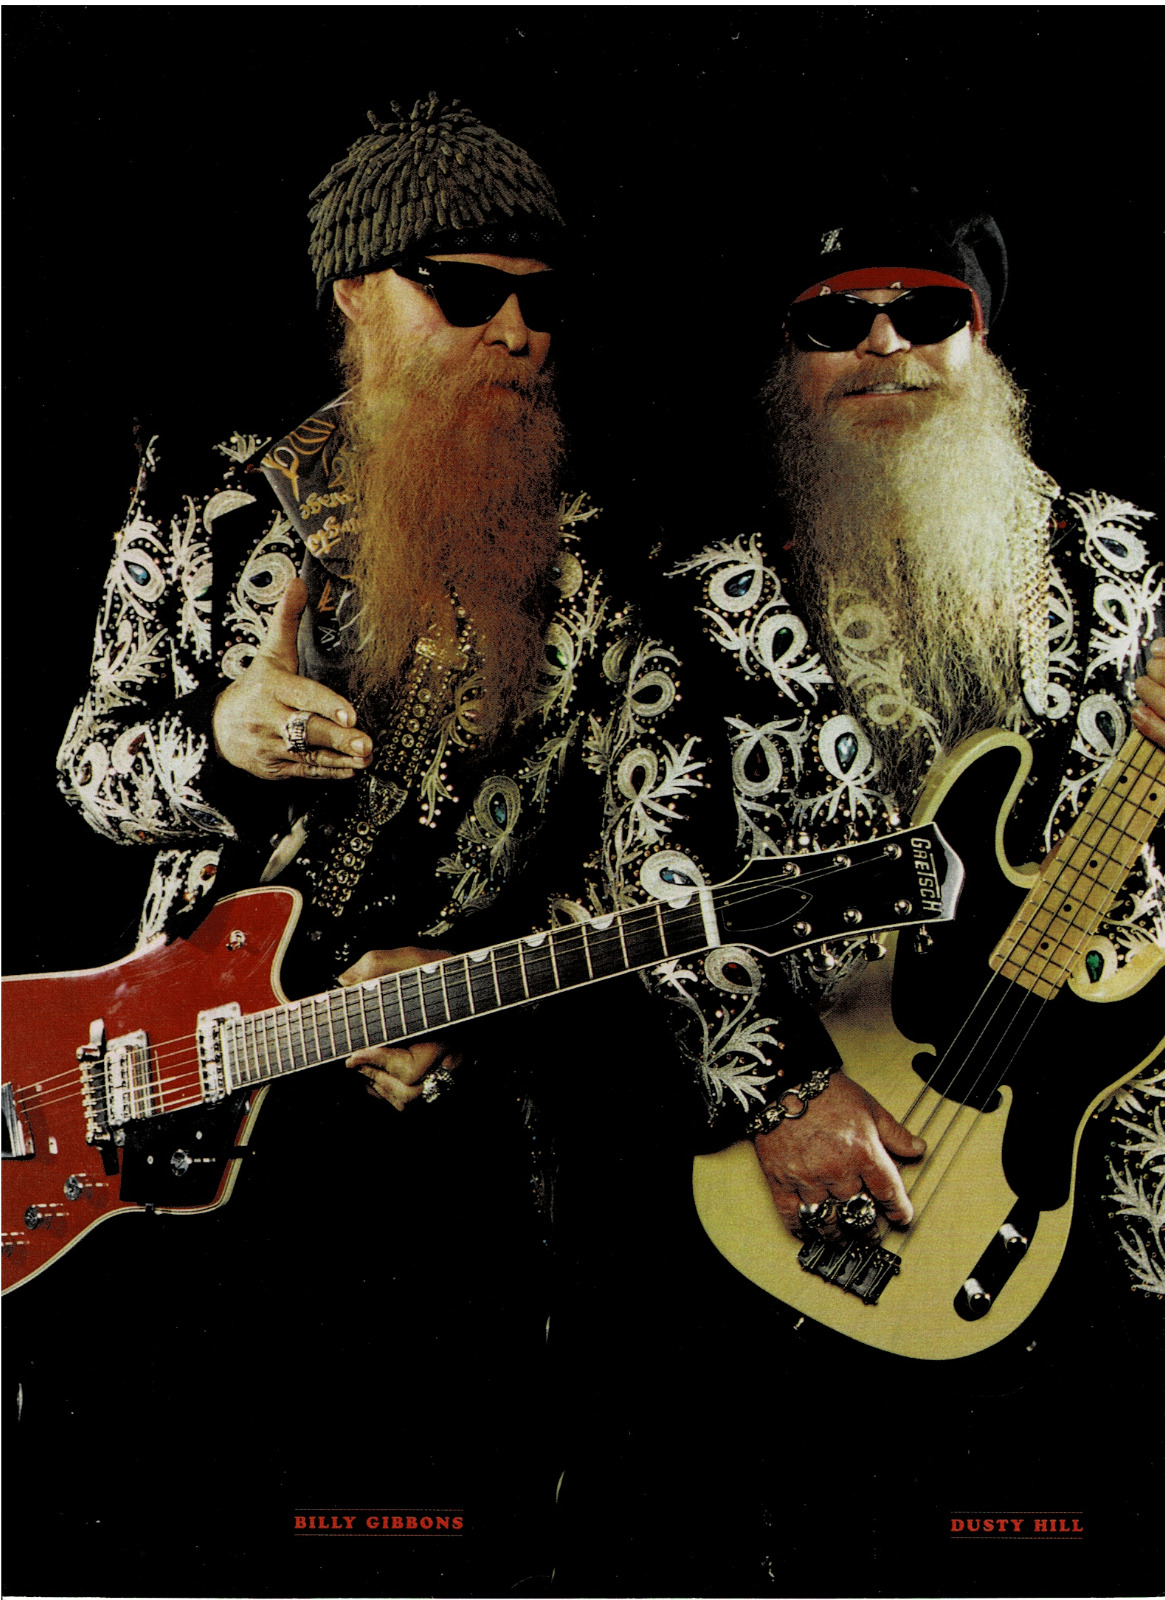 ZZ TOP - DUSTY HILL & BILLY GIBBONS - Music Print Ad Photo - 2003